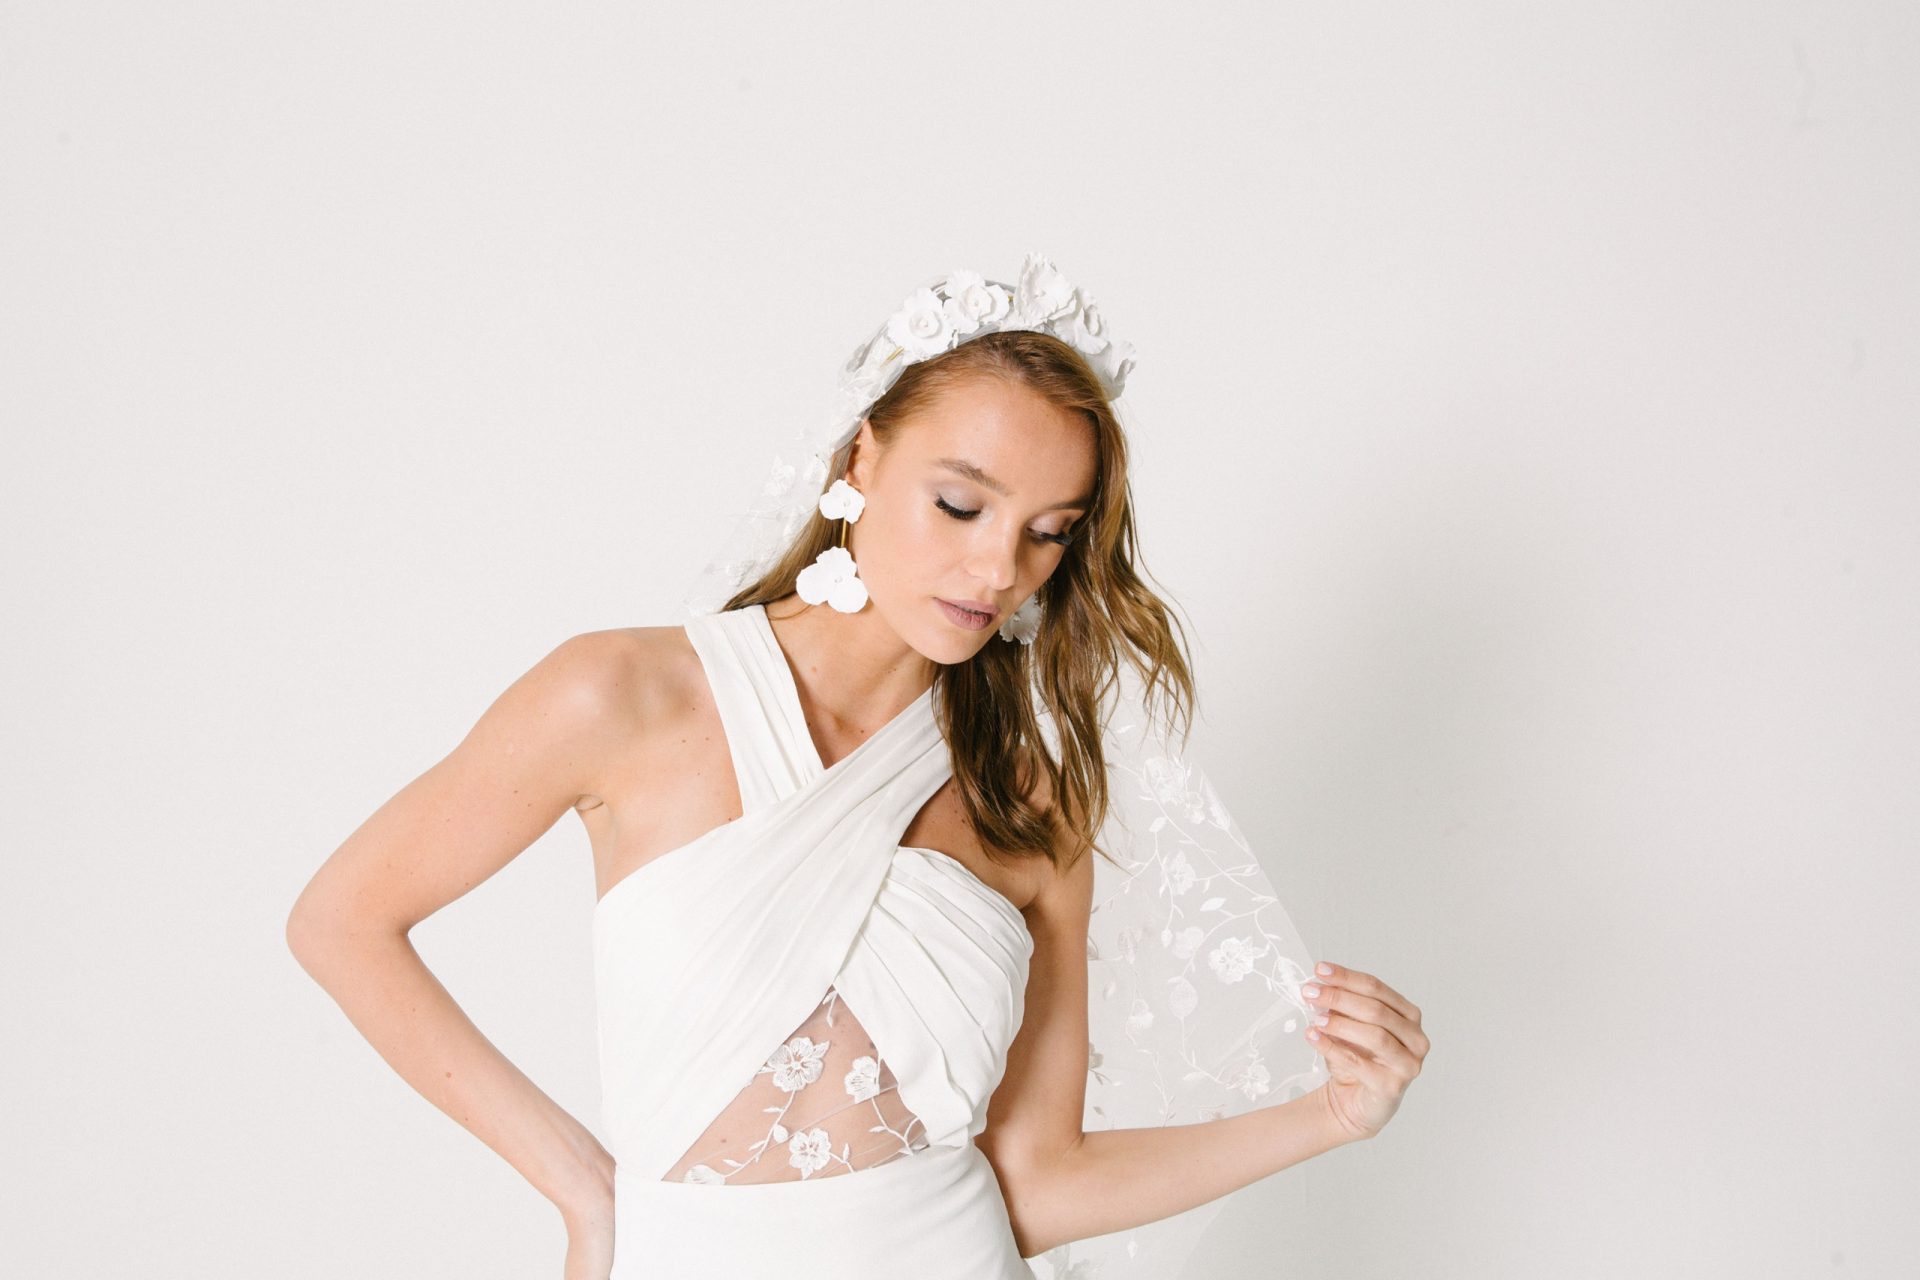 This bridal designer is bringing French cool-girl dresses to